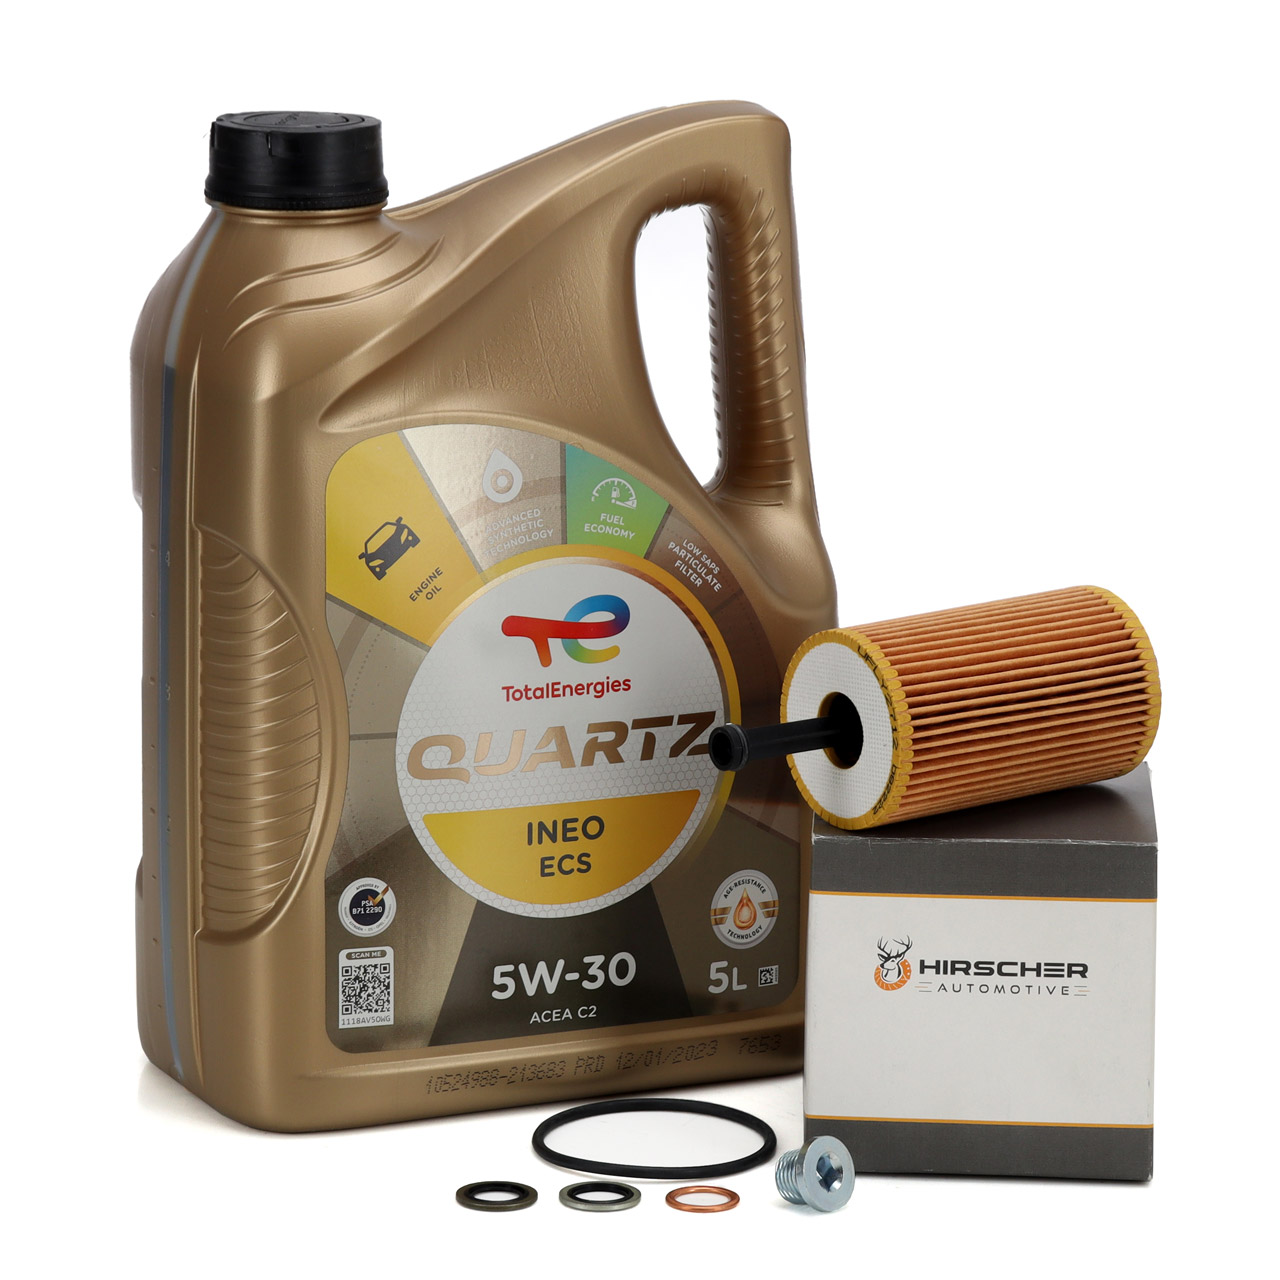 Total Quartz Ineo ECS  Leader in lubricants and additives